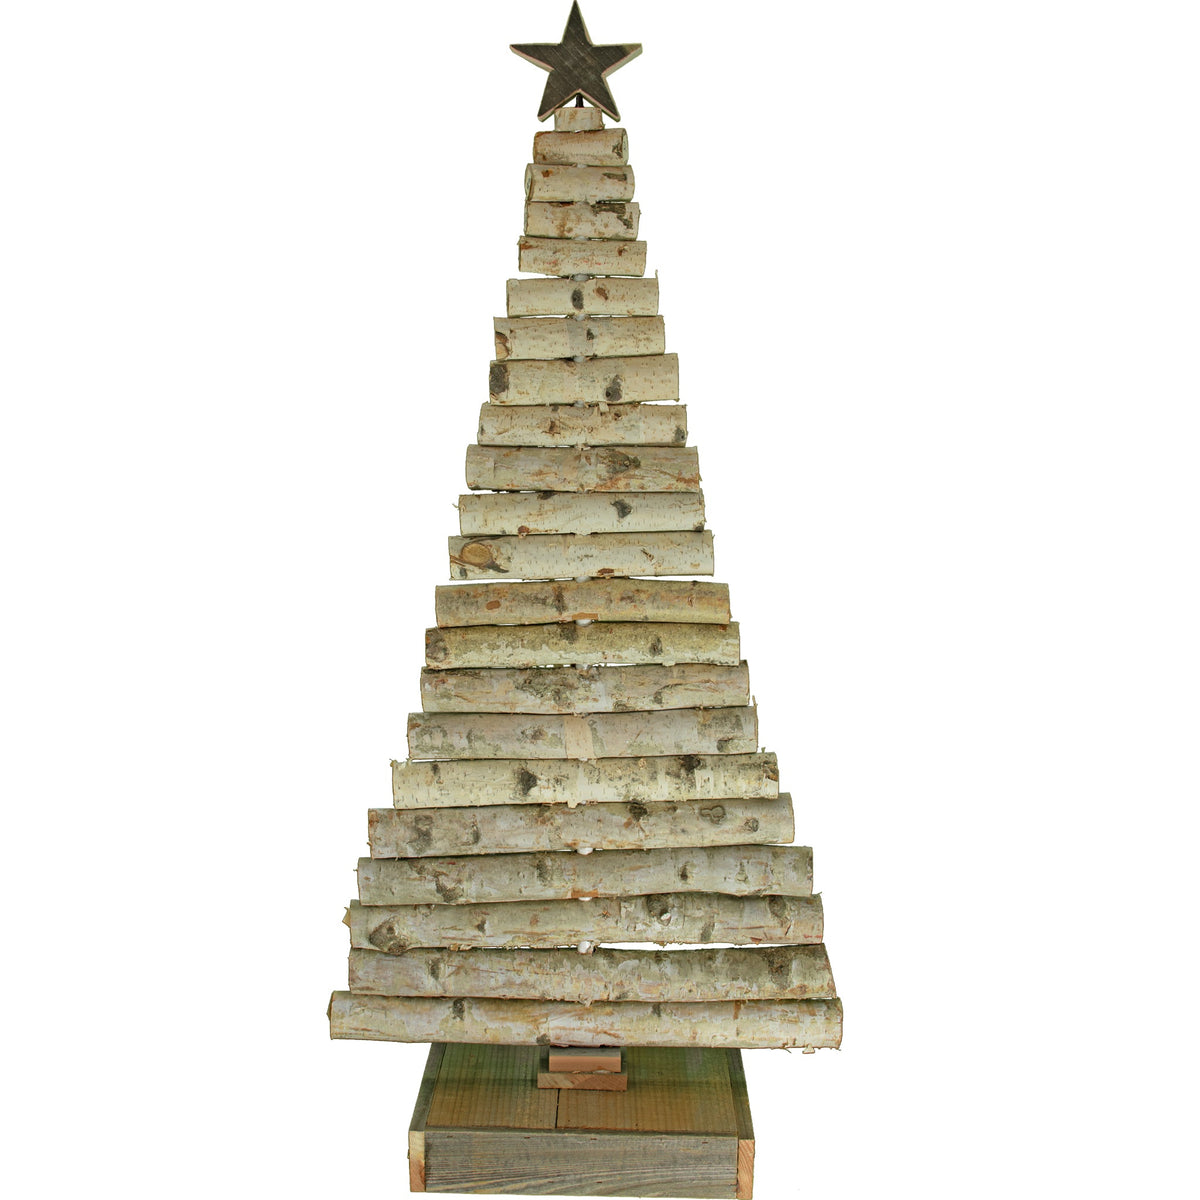 Introducing Lee Display's Rustic Birch Branch Christmas Trees    Crafted with care by our skilled production team in the USA, these trees are meticulously made using authentic Birch Branch logs. Each branch is carefully cleaned, cut to size, and assembled around a sturdy steel pole that runs through the core. These unique trees come with with a charming wooden stand and are crowned with a custom hand-cut wooden Star, adding a touch of rustic elegance to your festive decor.